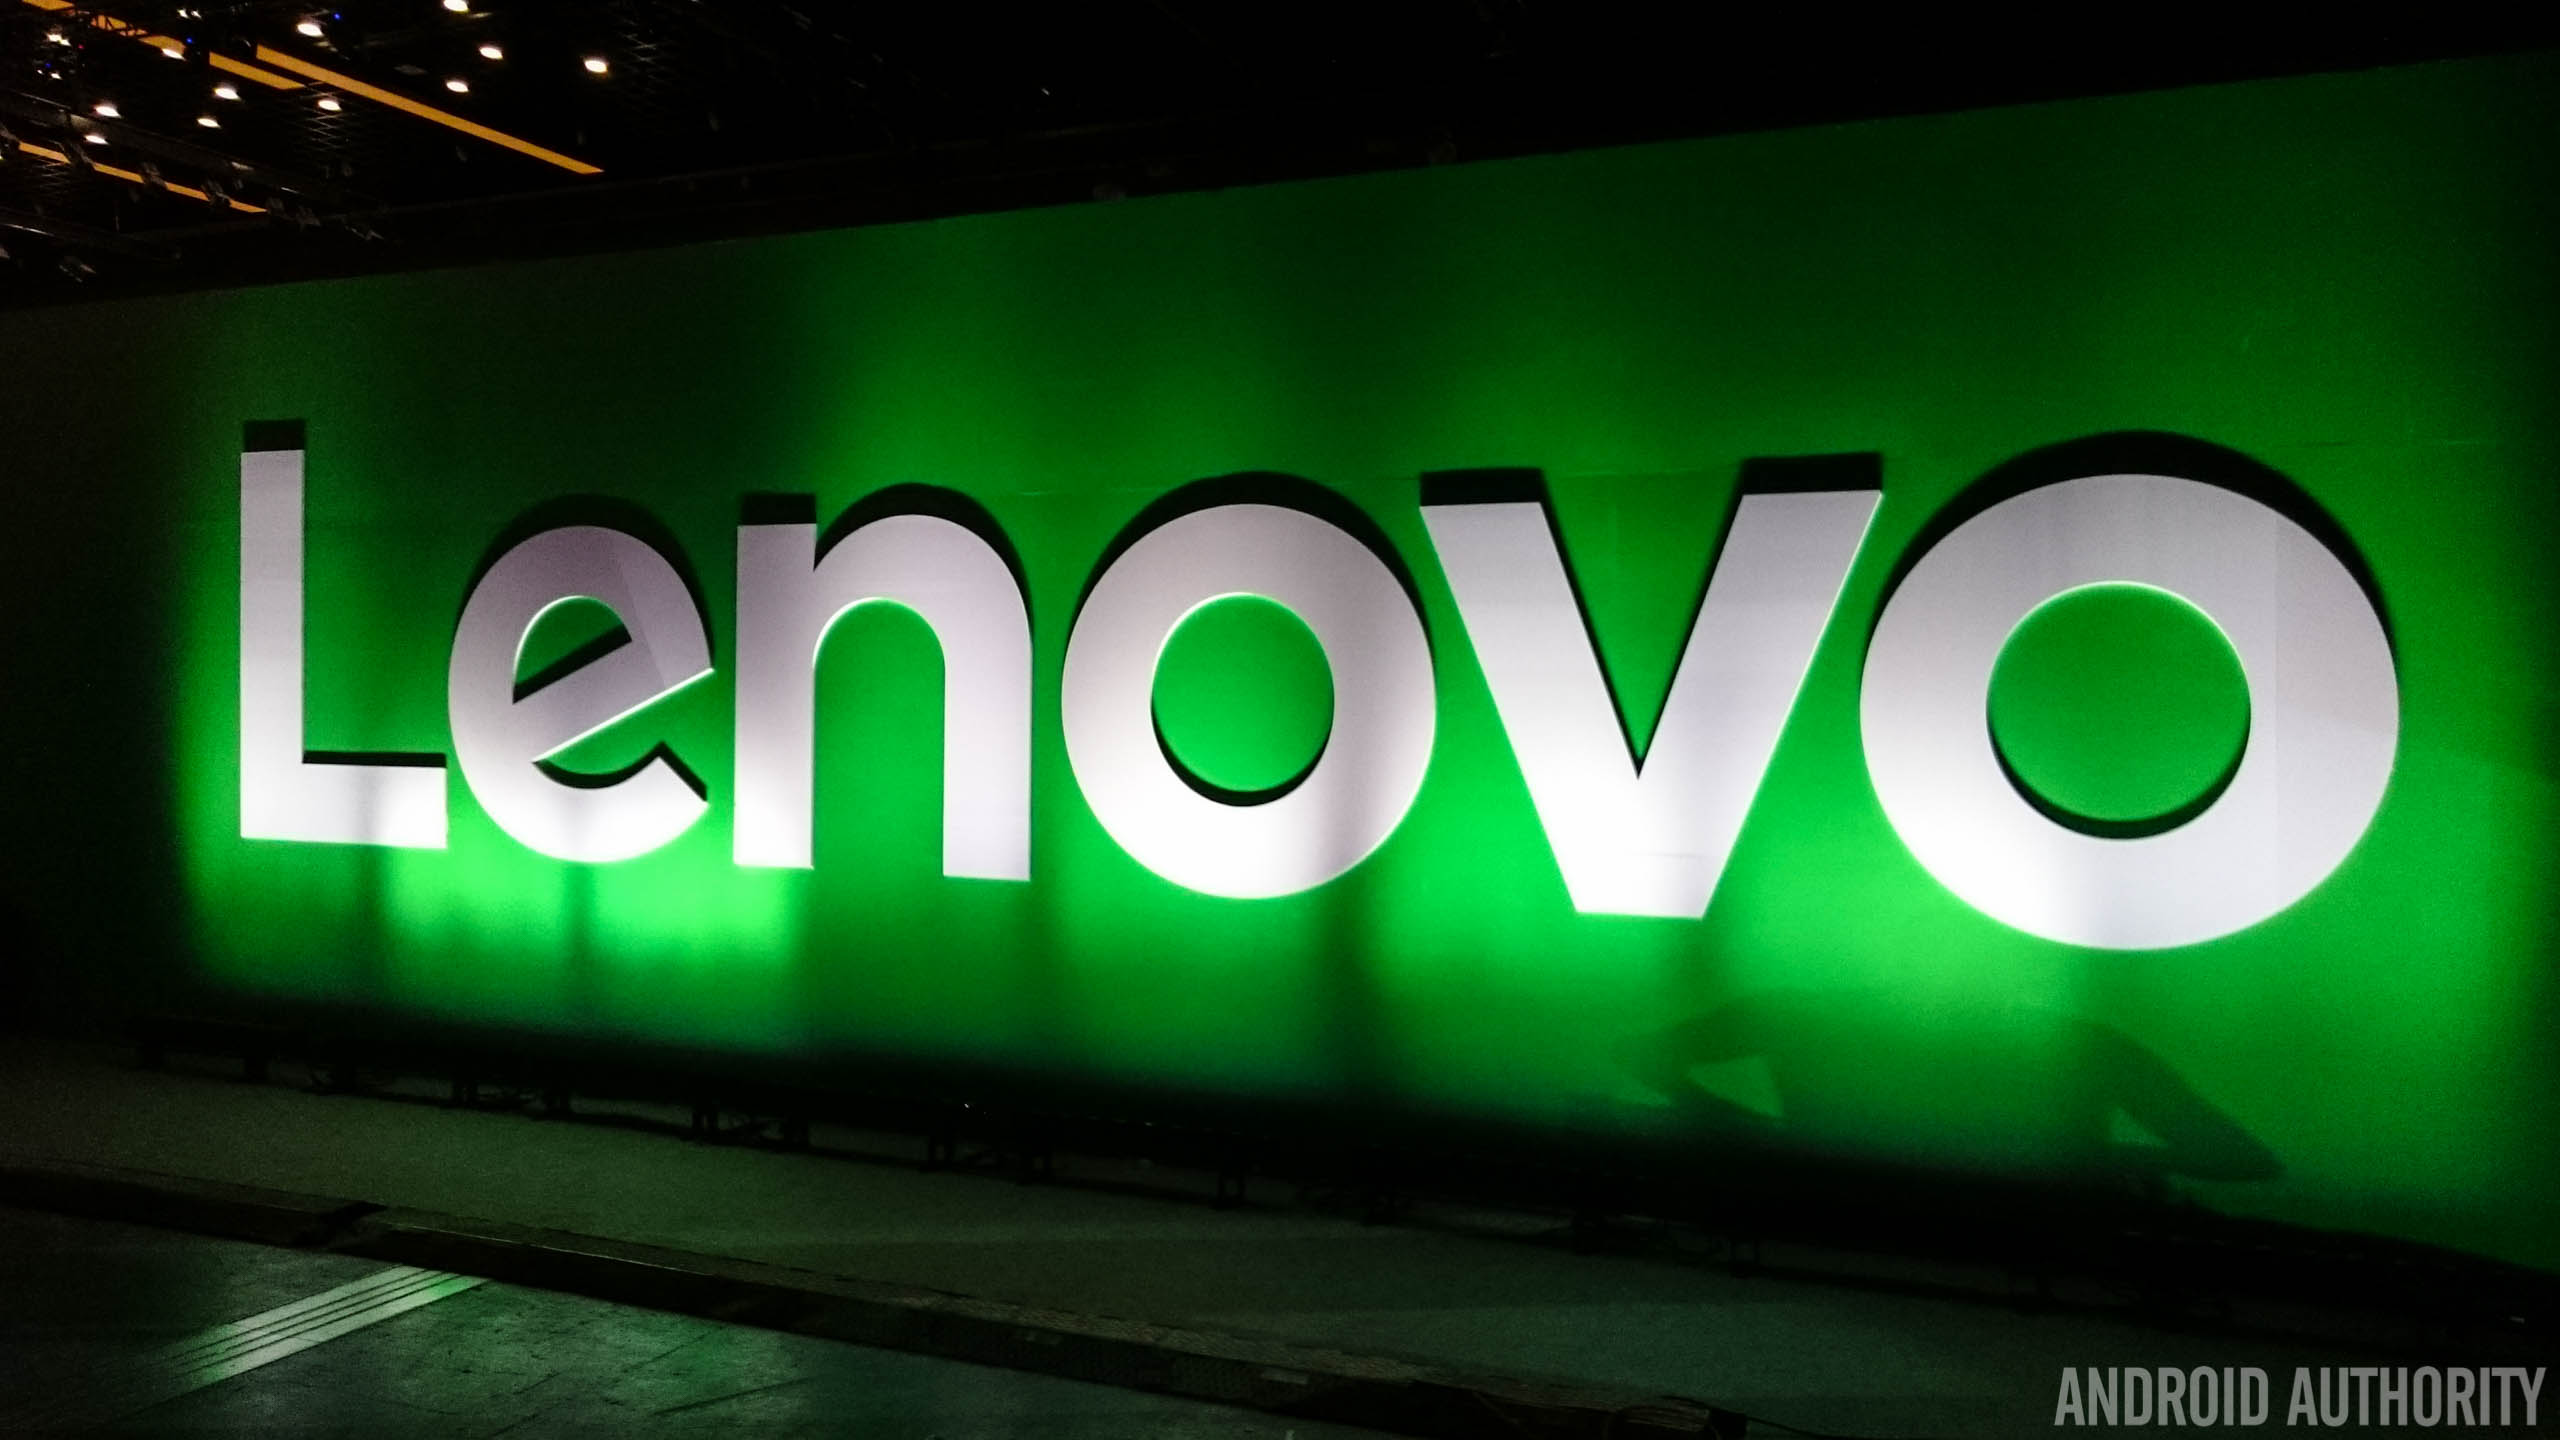 lenovo wallpaper,green,text,font,neon,electronic signage